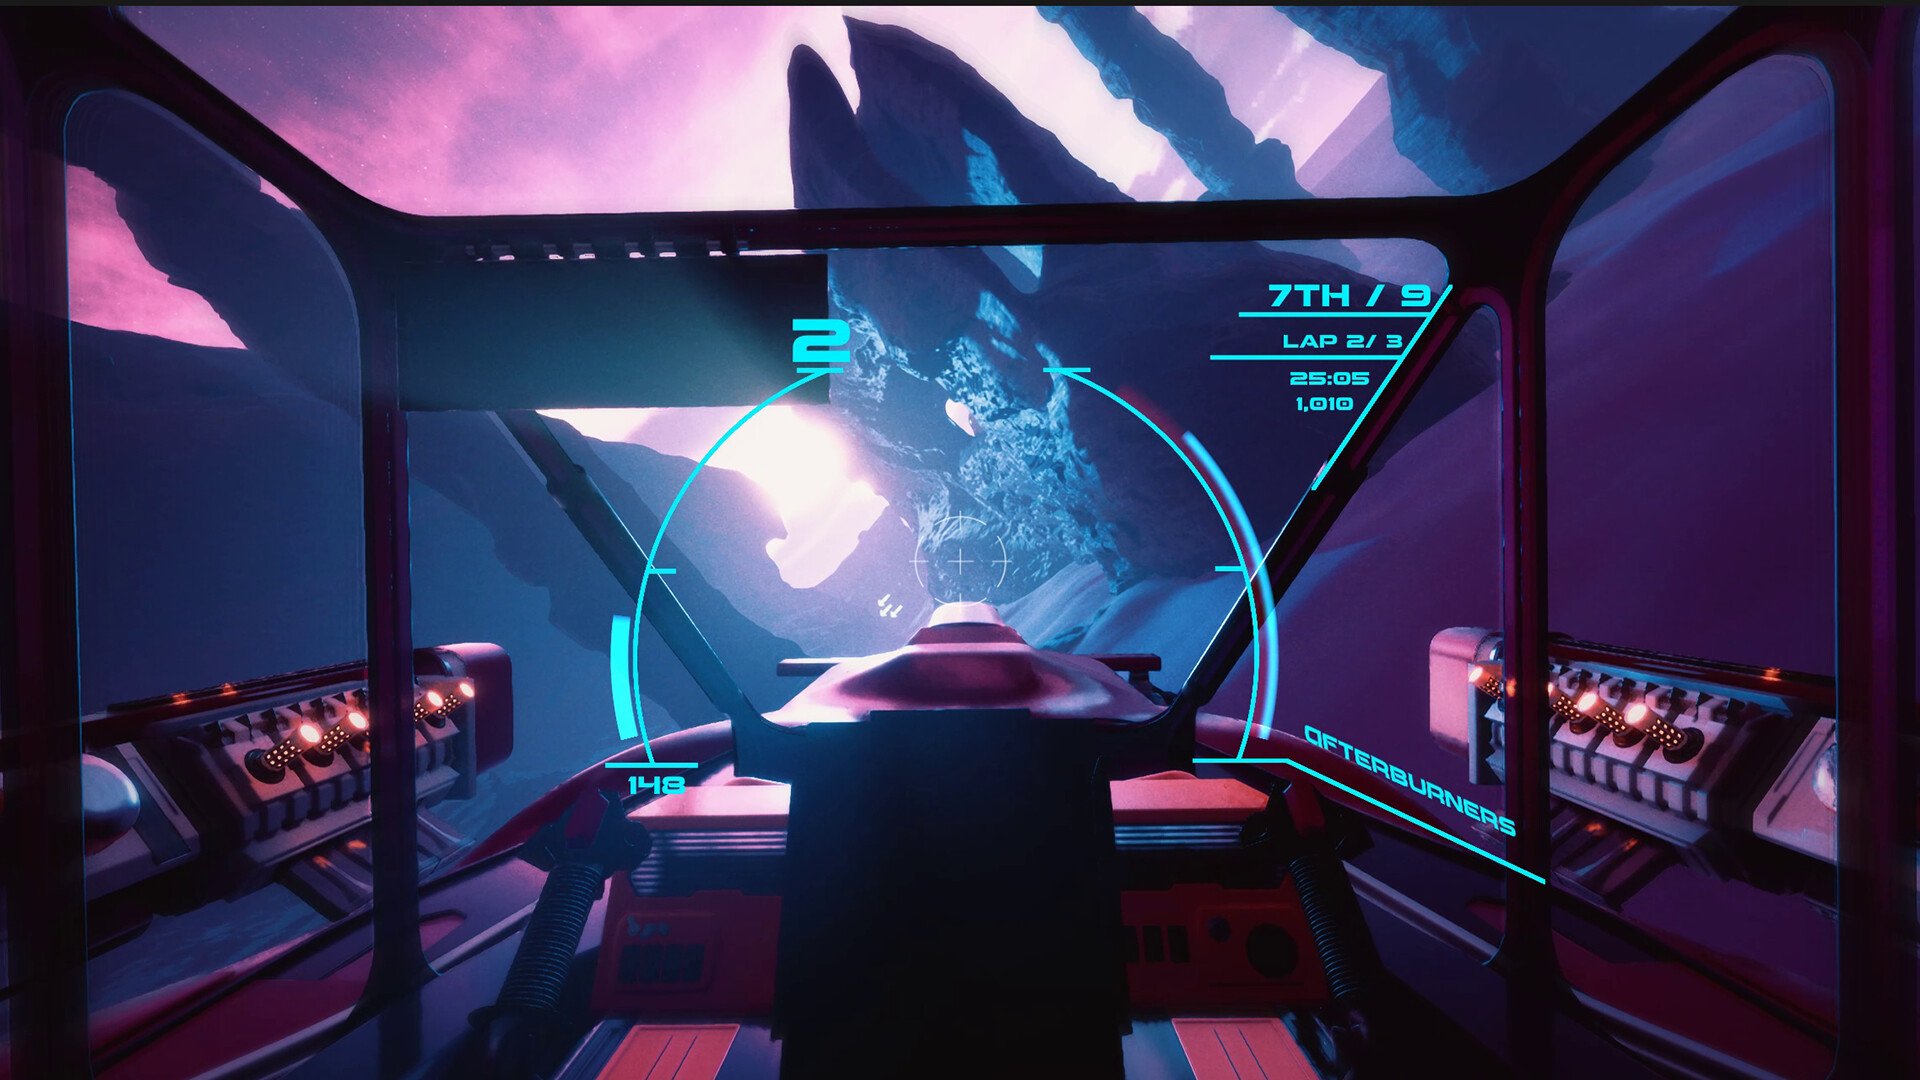 A player racing jets in the space. Image is from game Dagger Run: Aerocombatic Racing.